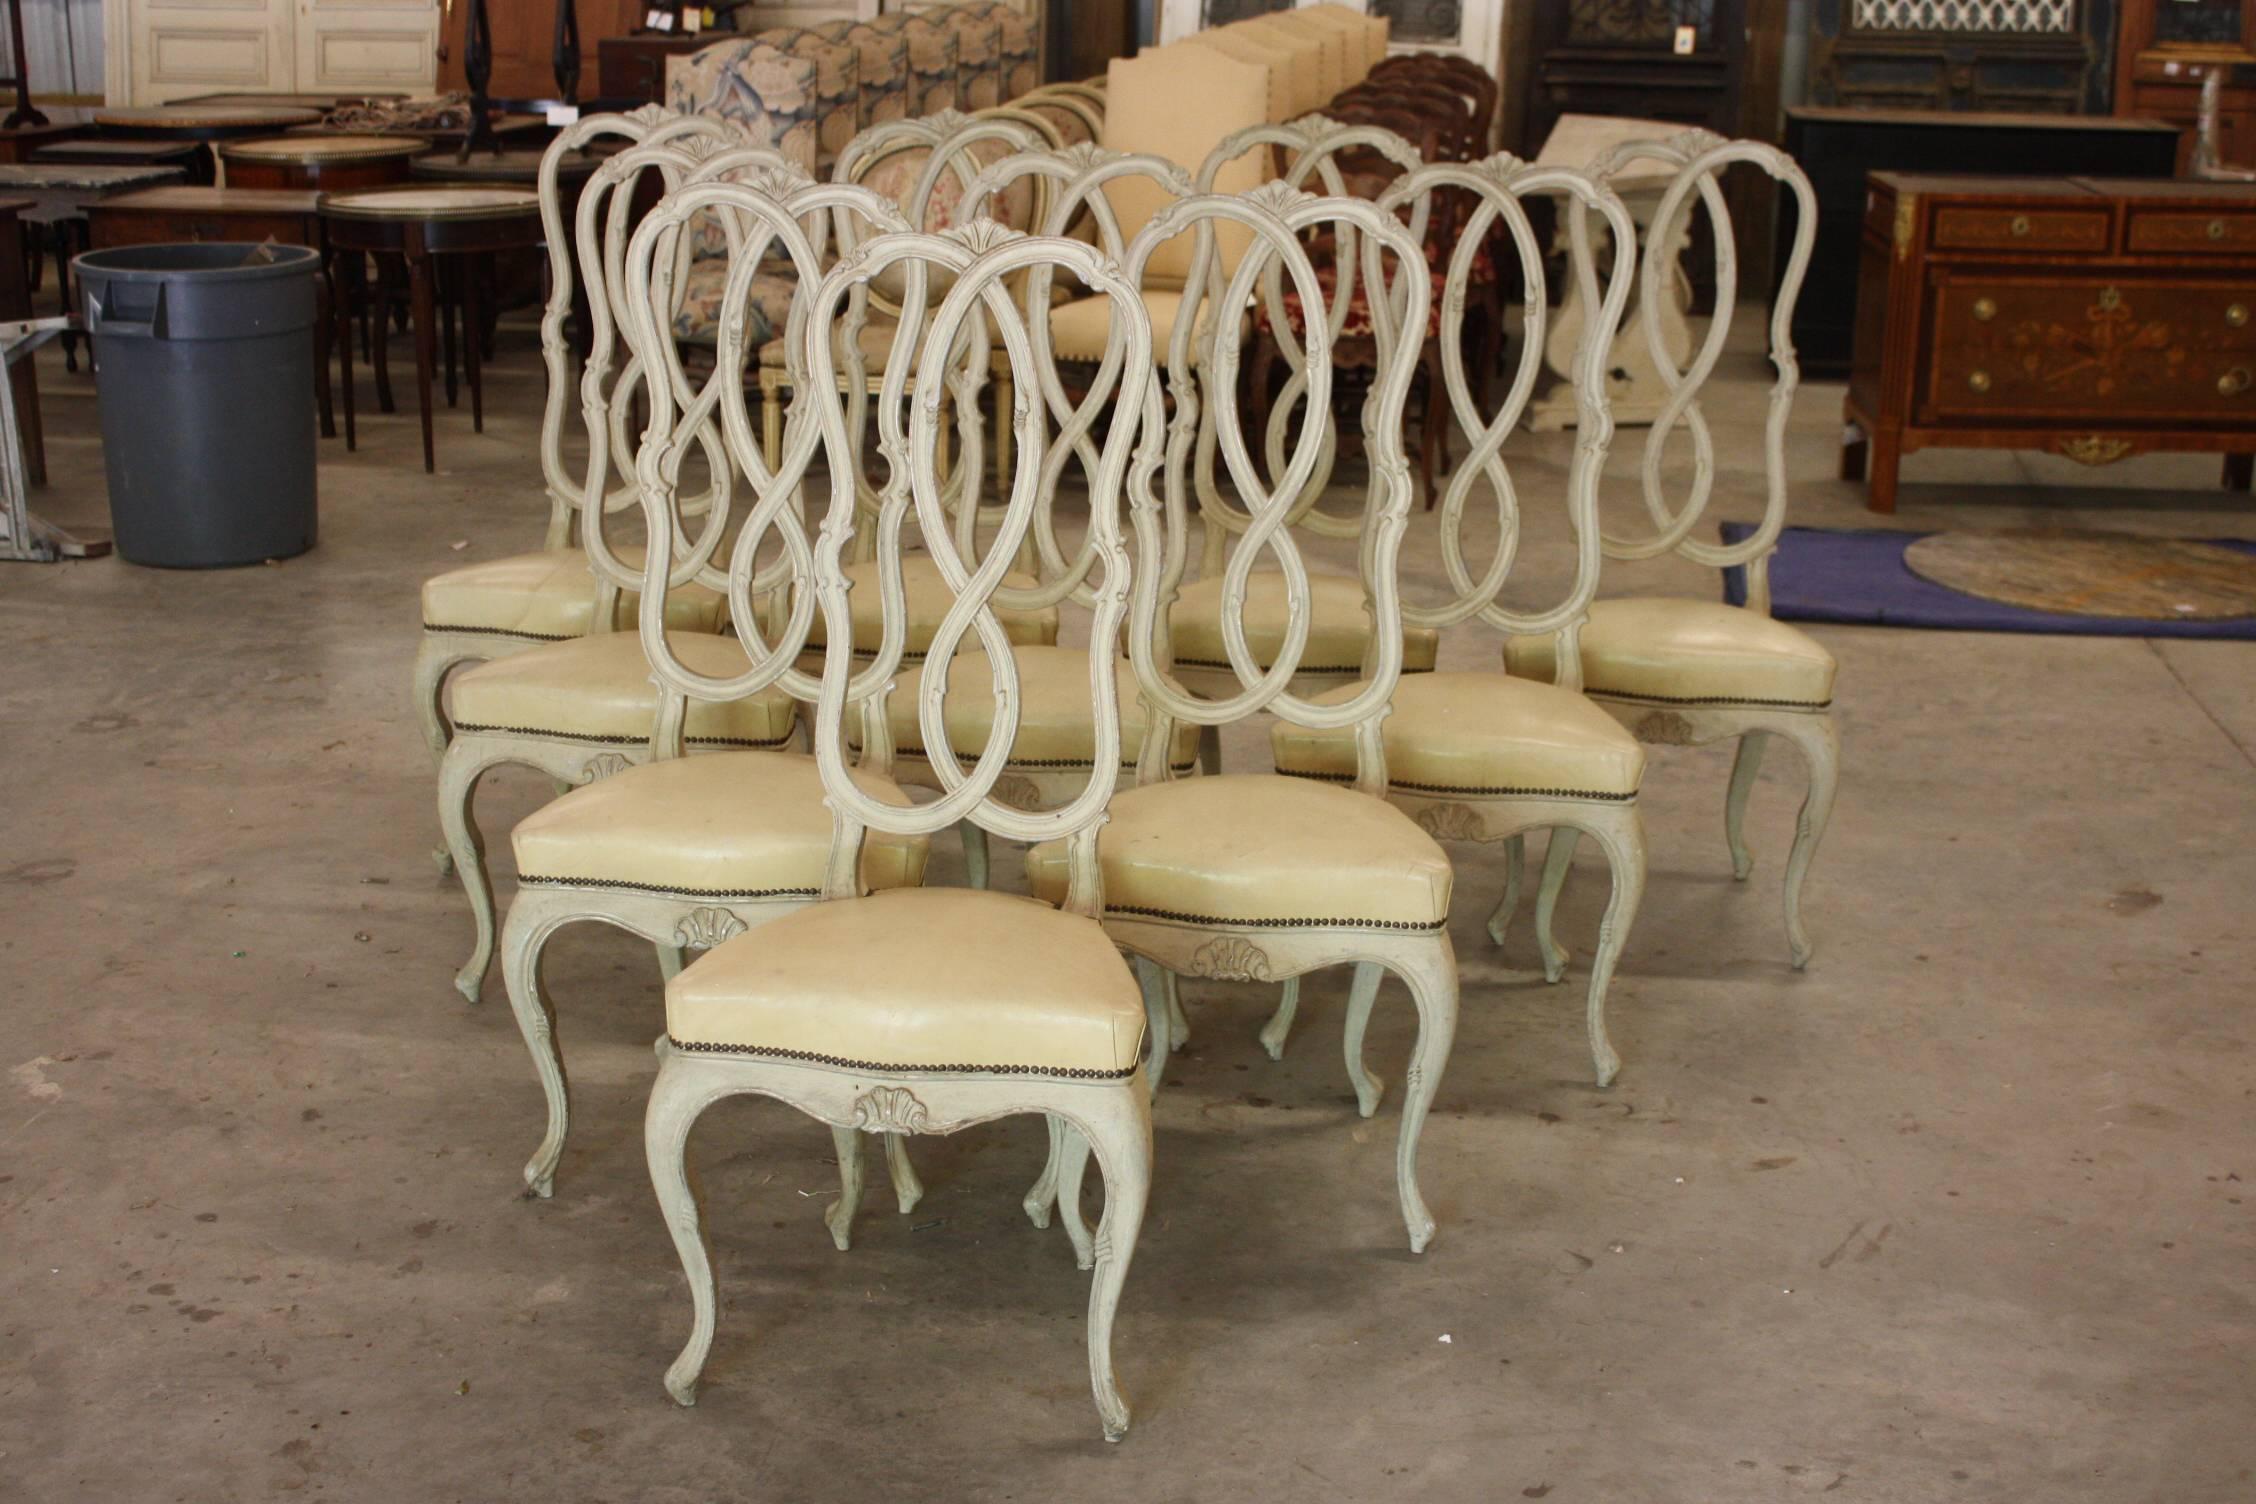 A set of ten Venetian style painted wood dining room chairs with nicely carved back, cabriole legs, seats upholster in leather.